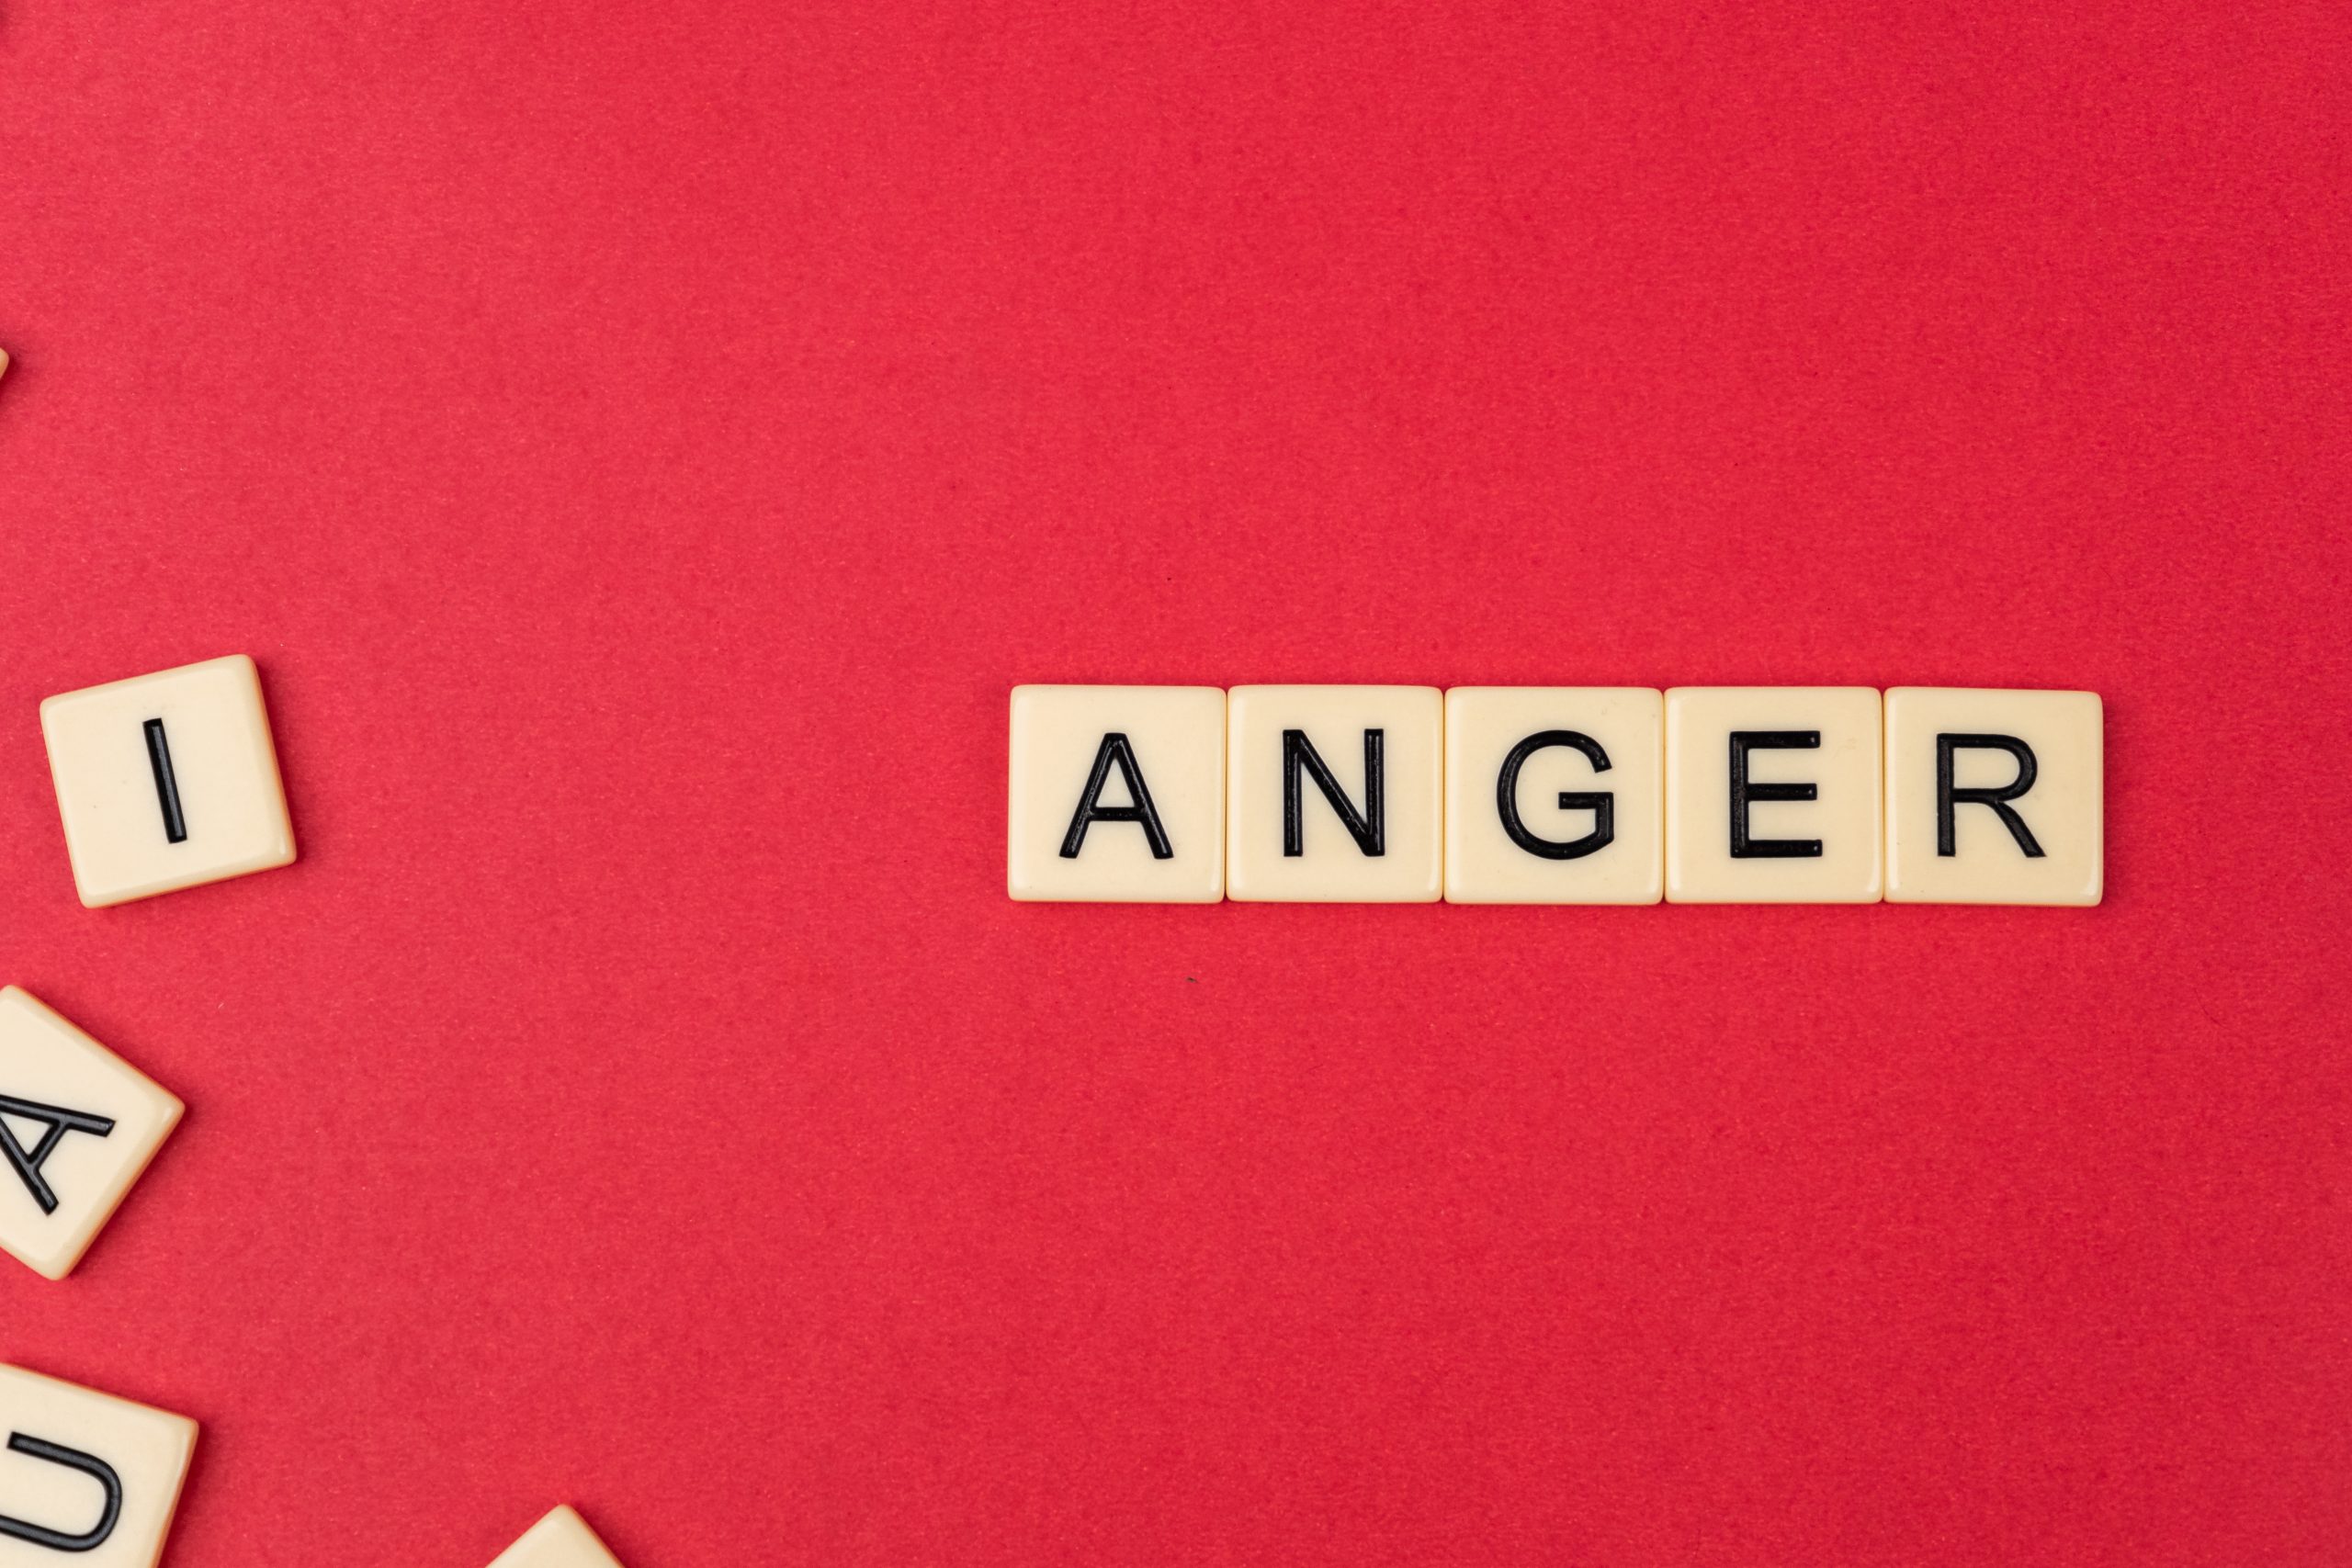 anger-written-with-scrabble-39426-pixahive